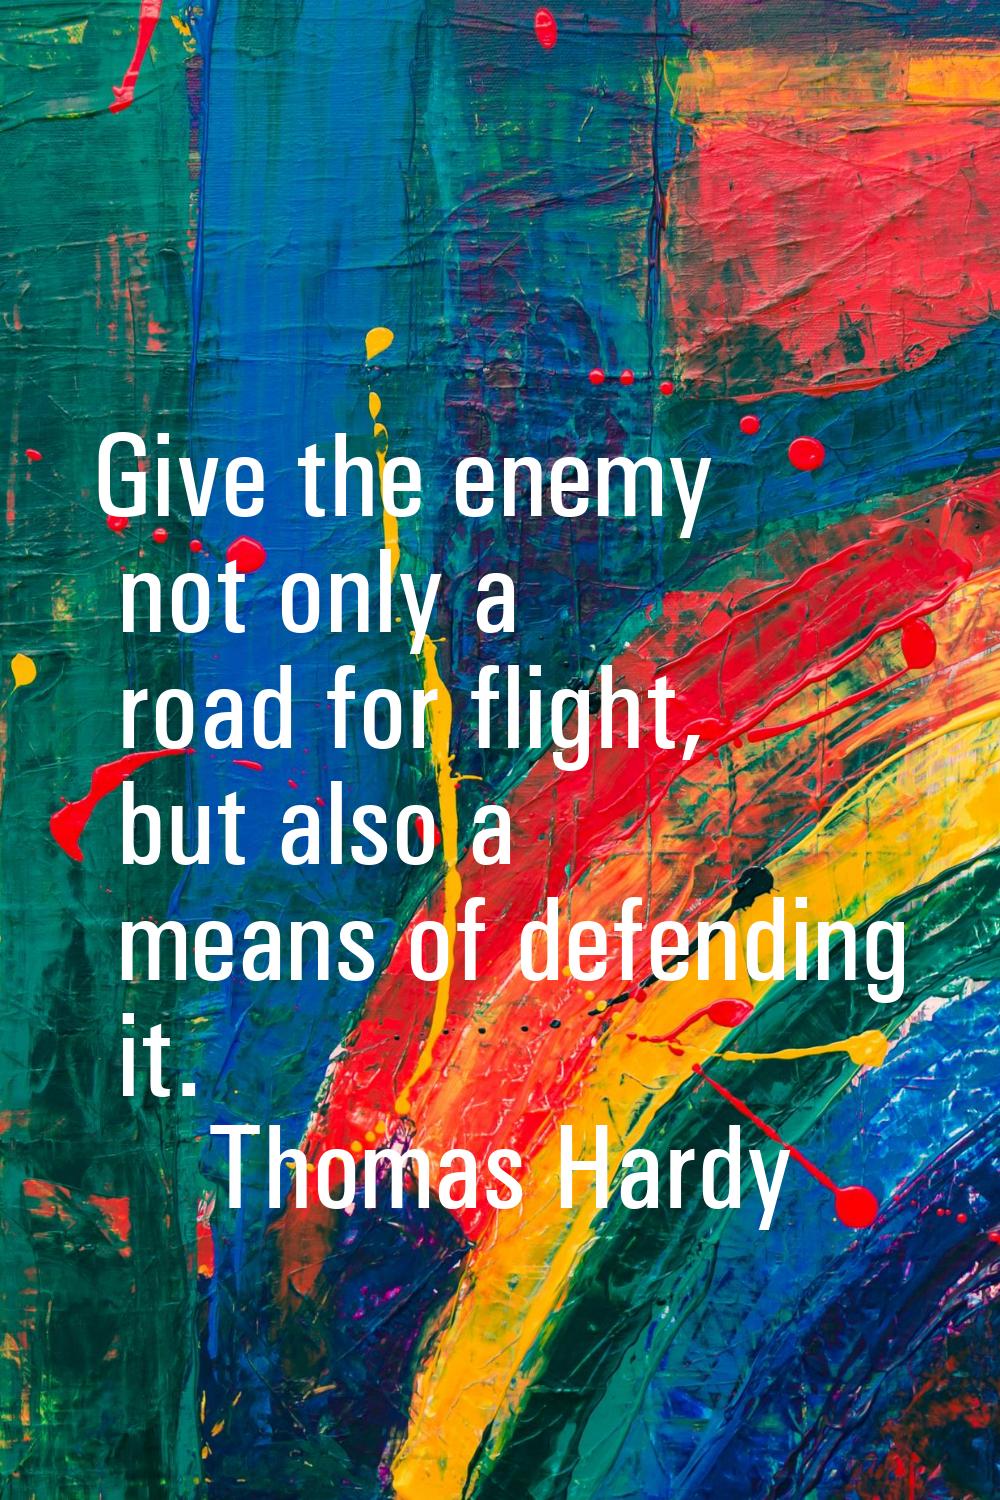 Give the enemy not only a road for flight, but also a means of defending it.